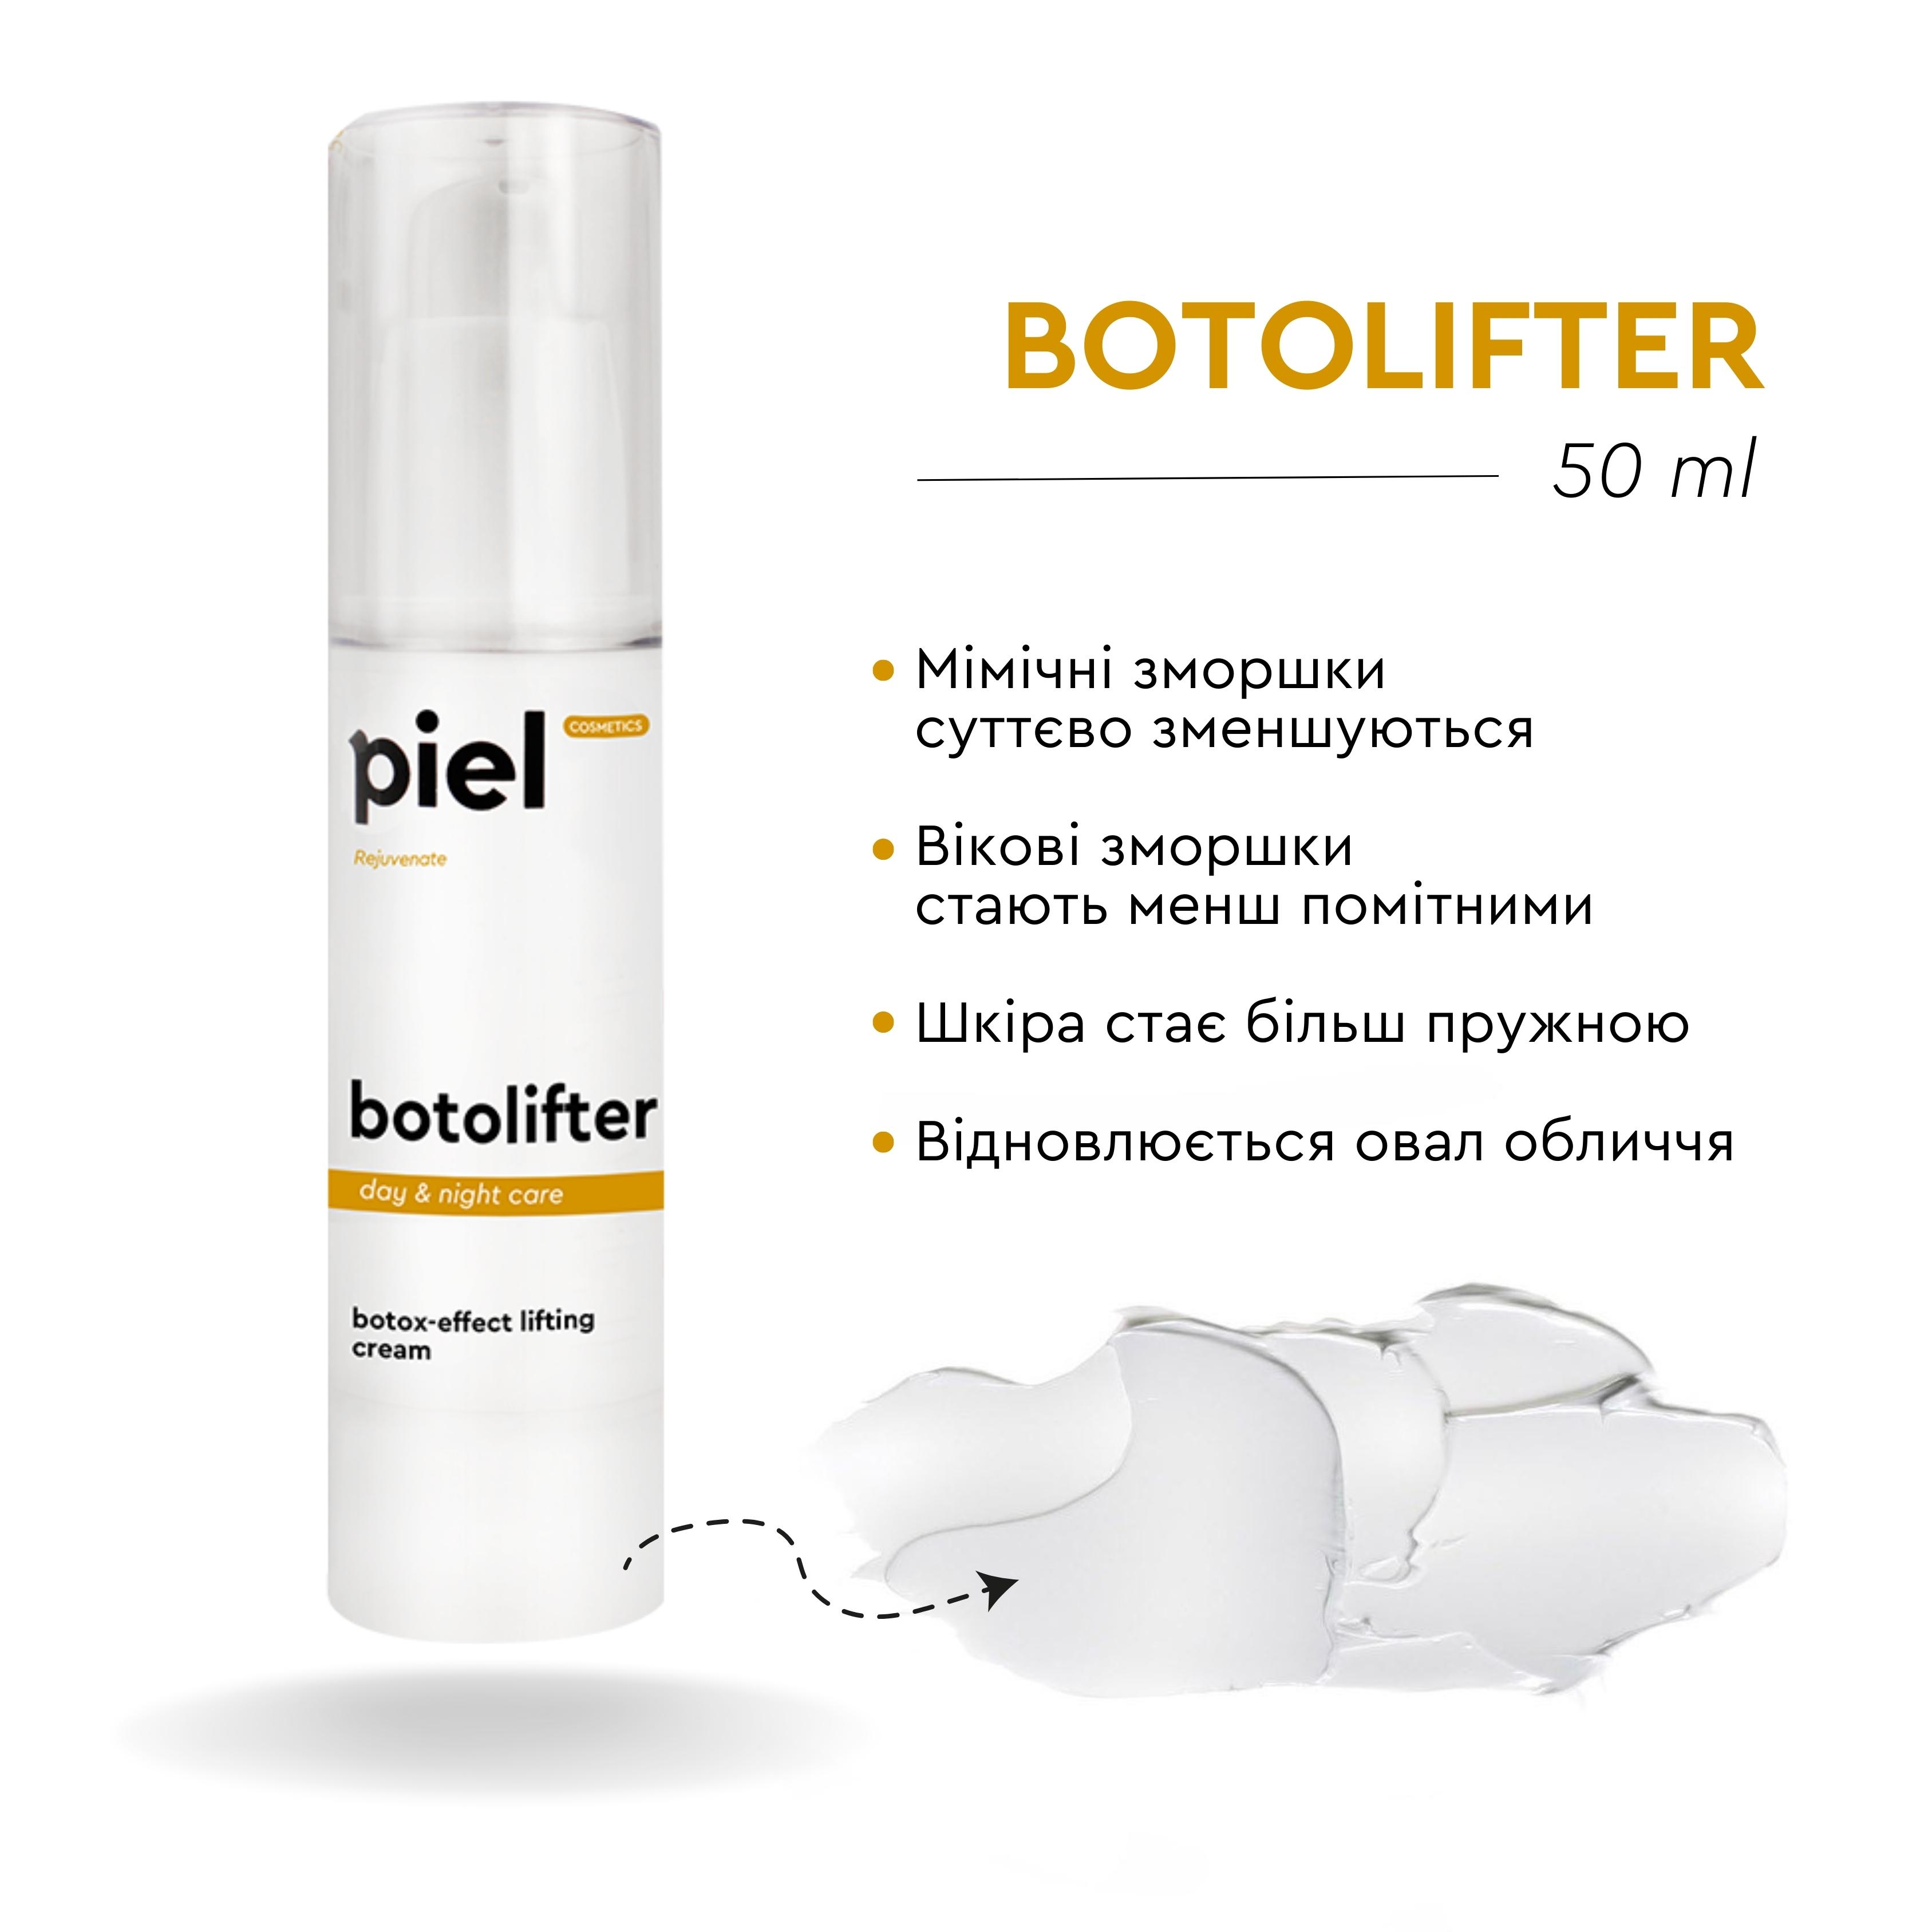 Miniature BOTOLIFTER Lifting Cream  Day&Night Care against mimic wrinkles